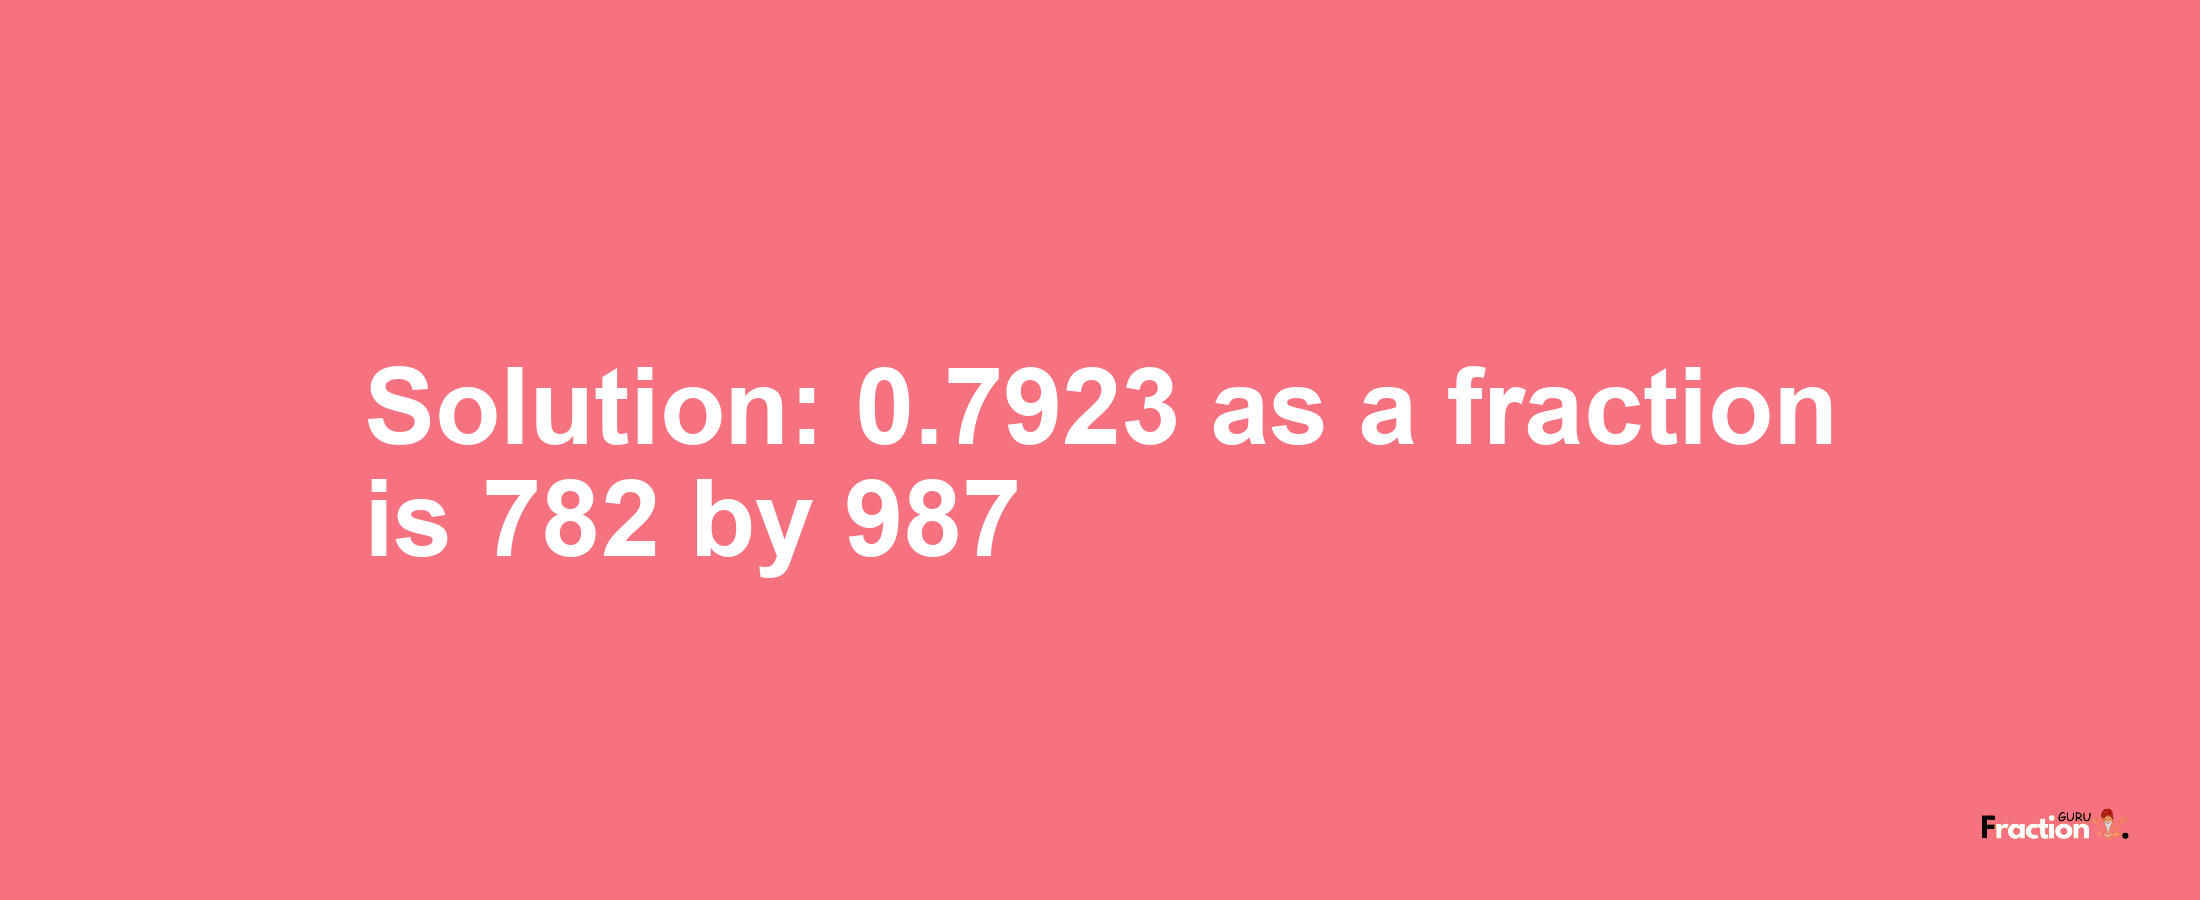 Solution:0.7923 as a fraction is 782/987